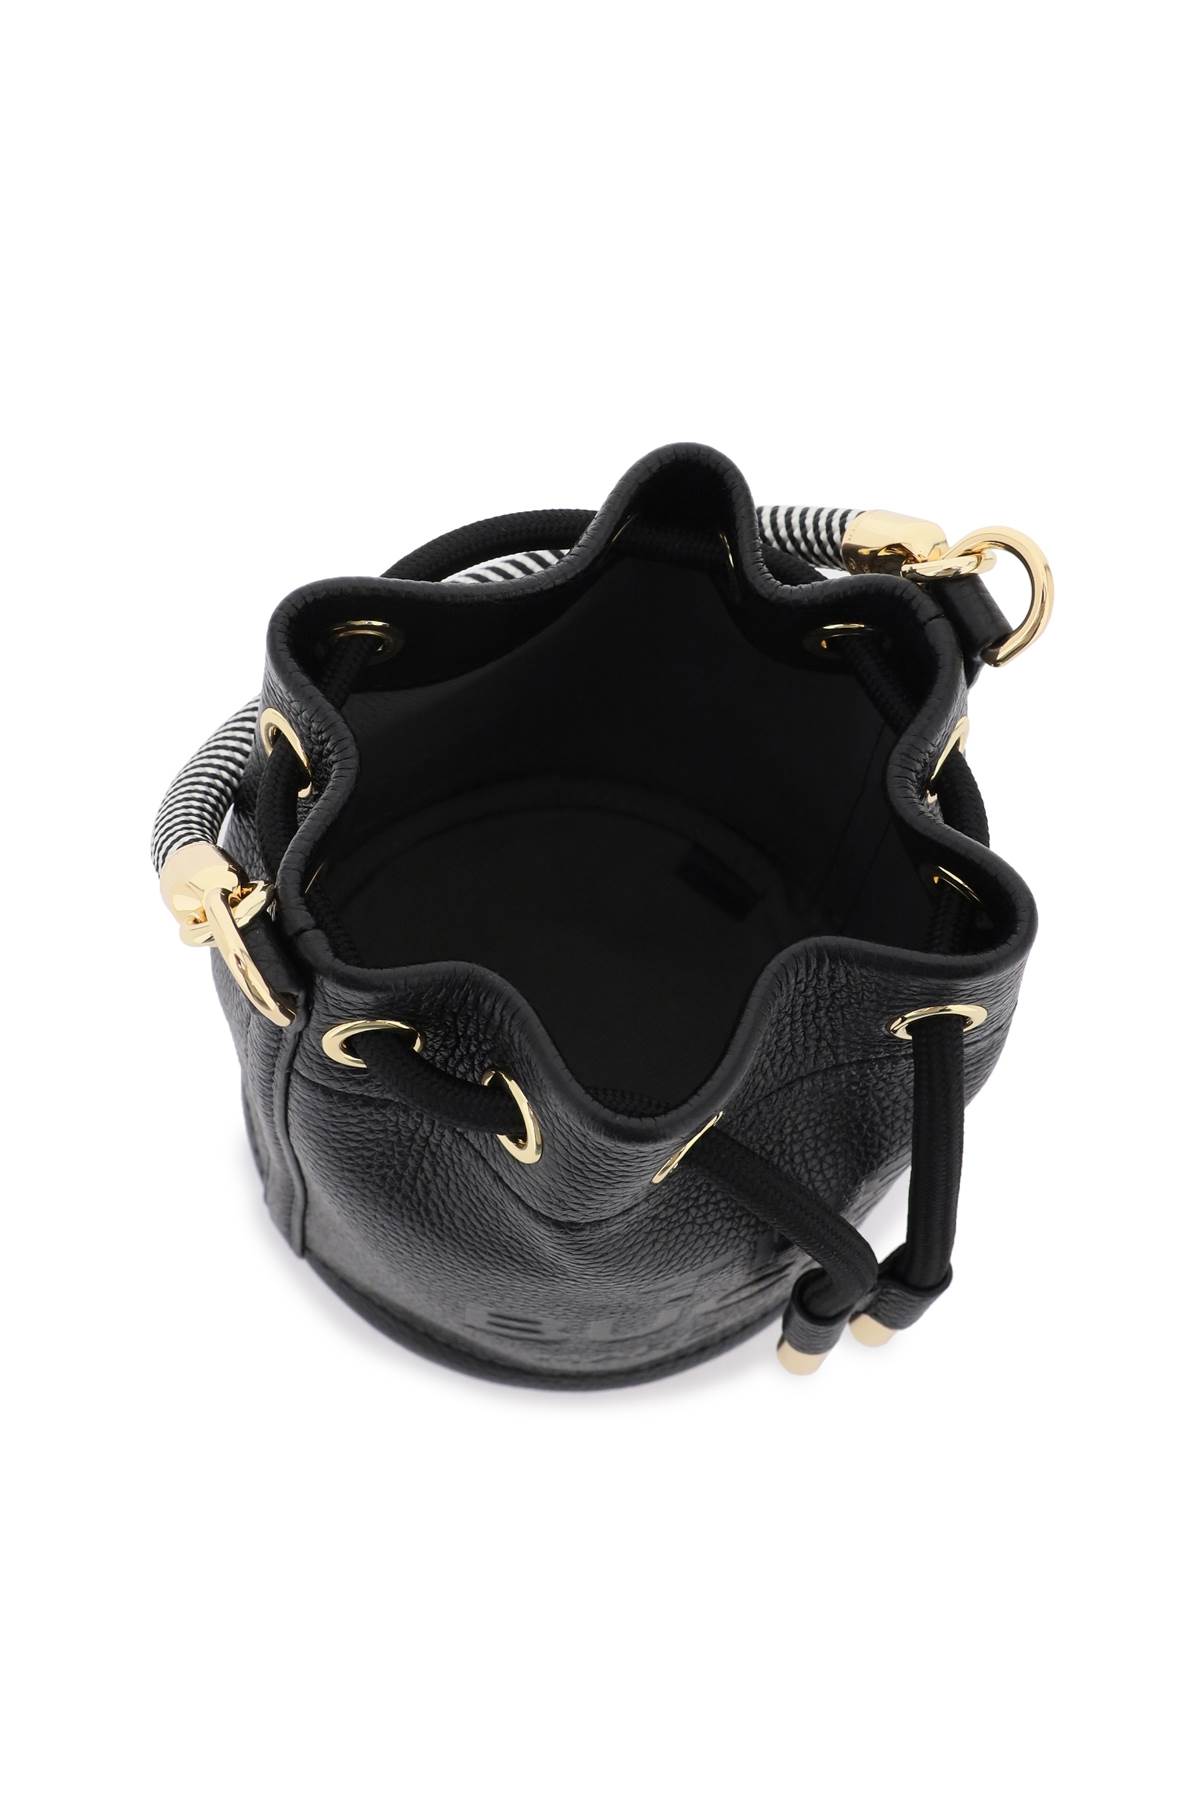 Shop Marc Jacobs The Leather Bucket Bag In Black (black)